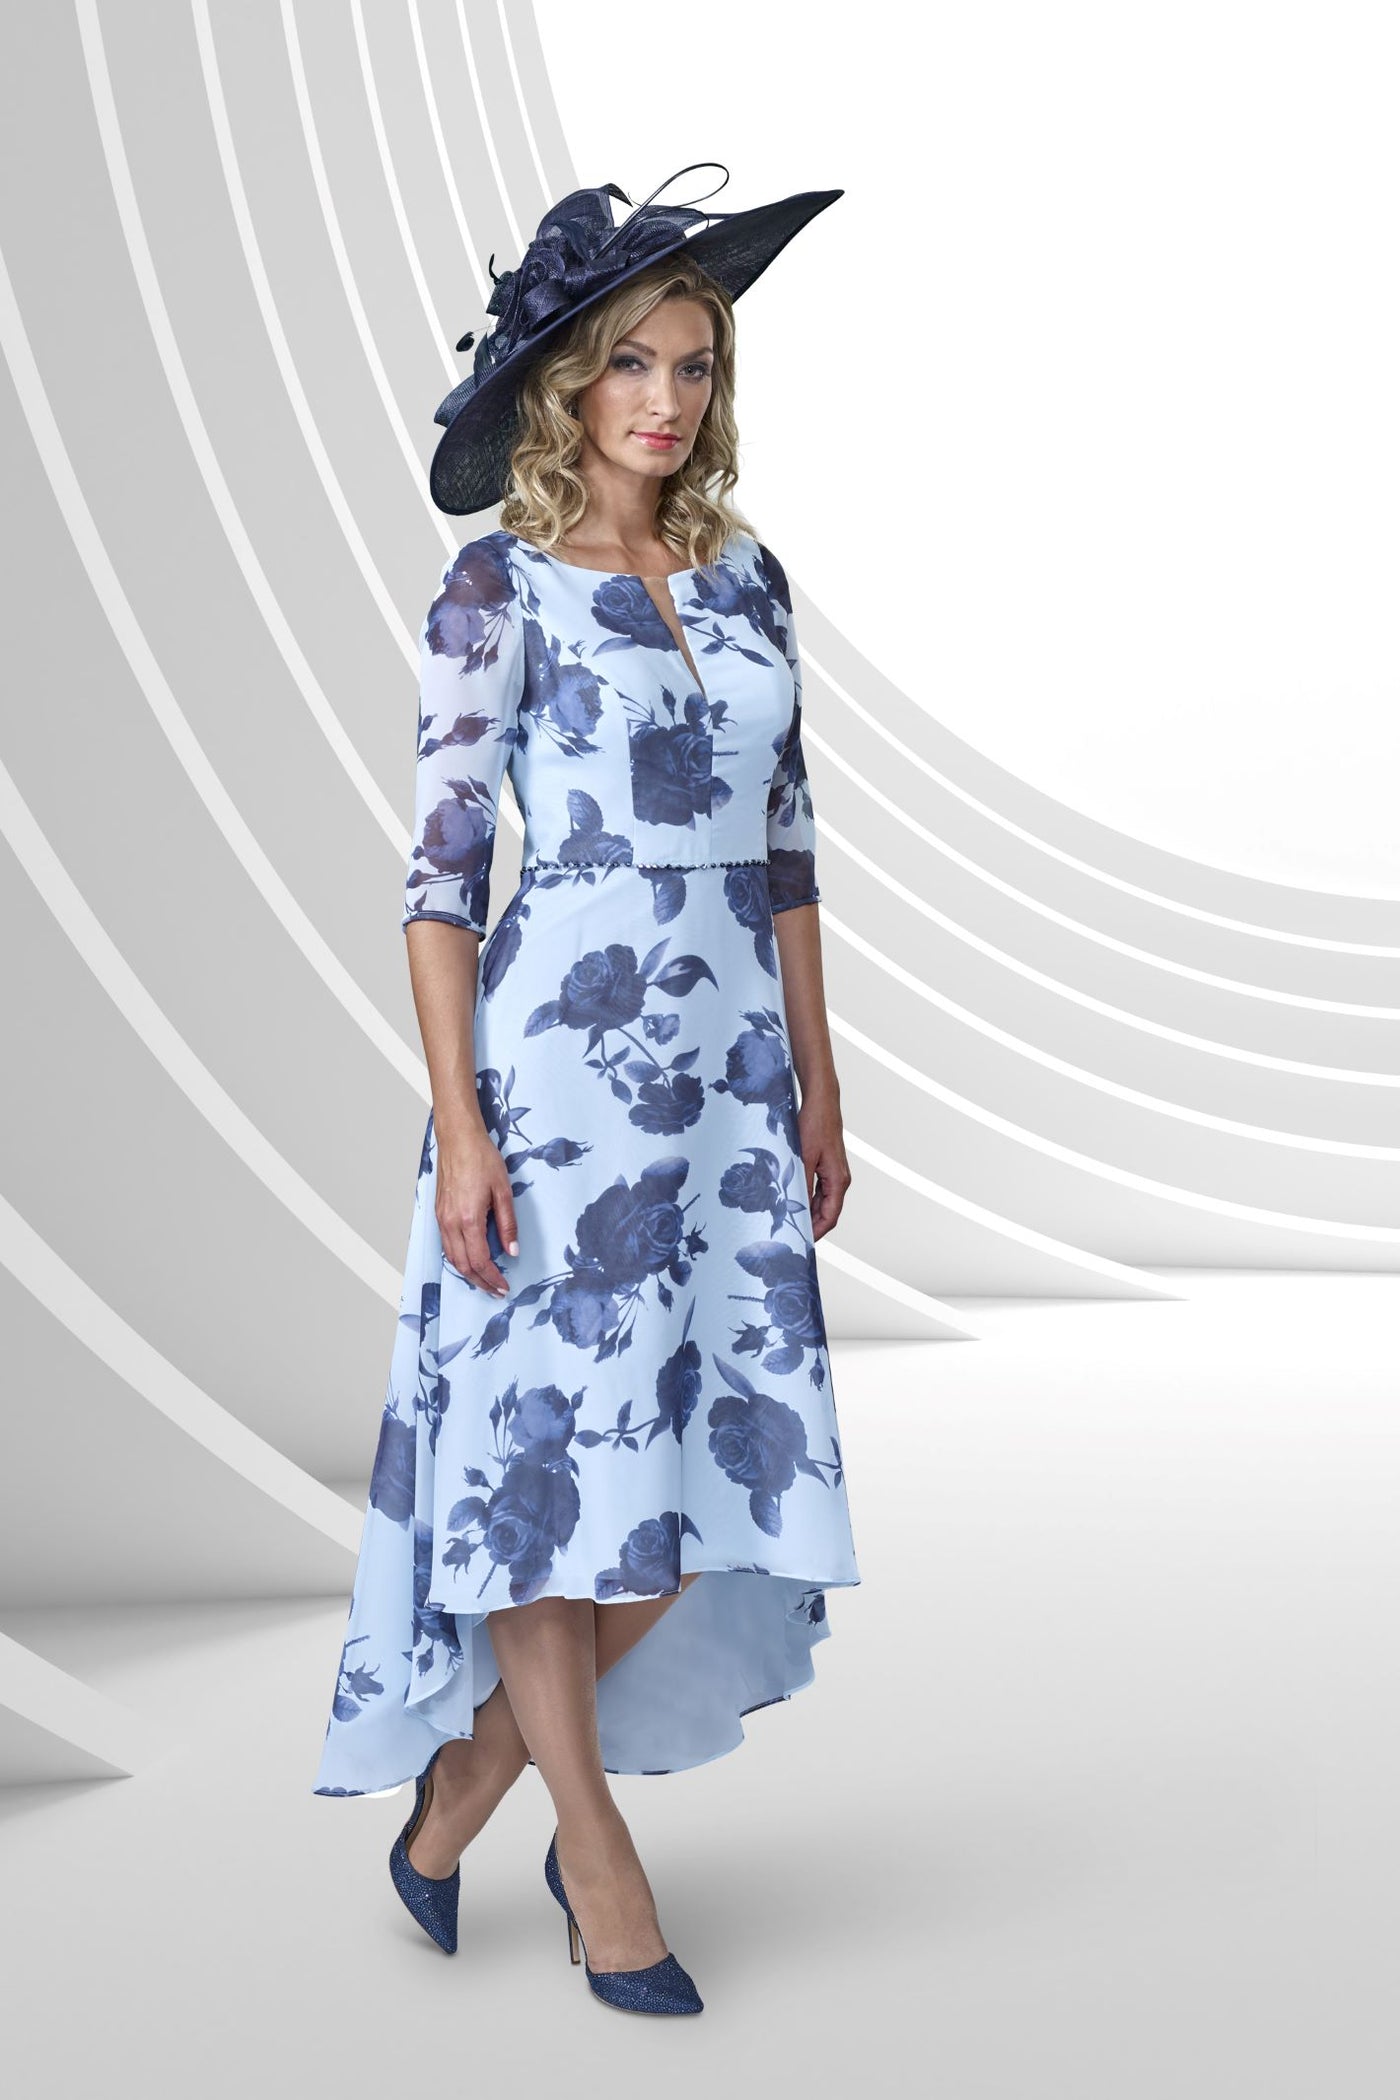 Veromia VO9200 Baby Blue/Navy Sleeved Occasion Dress